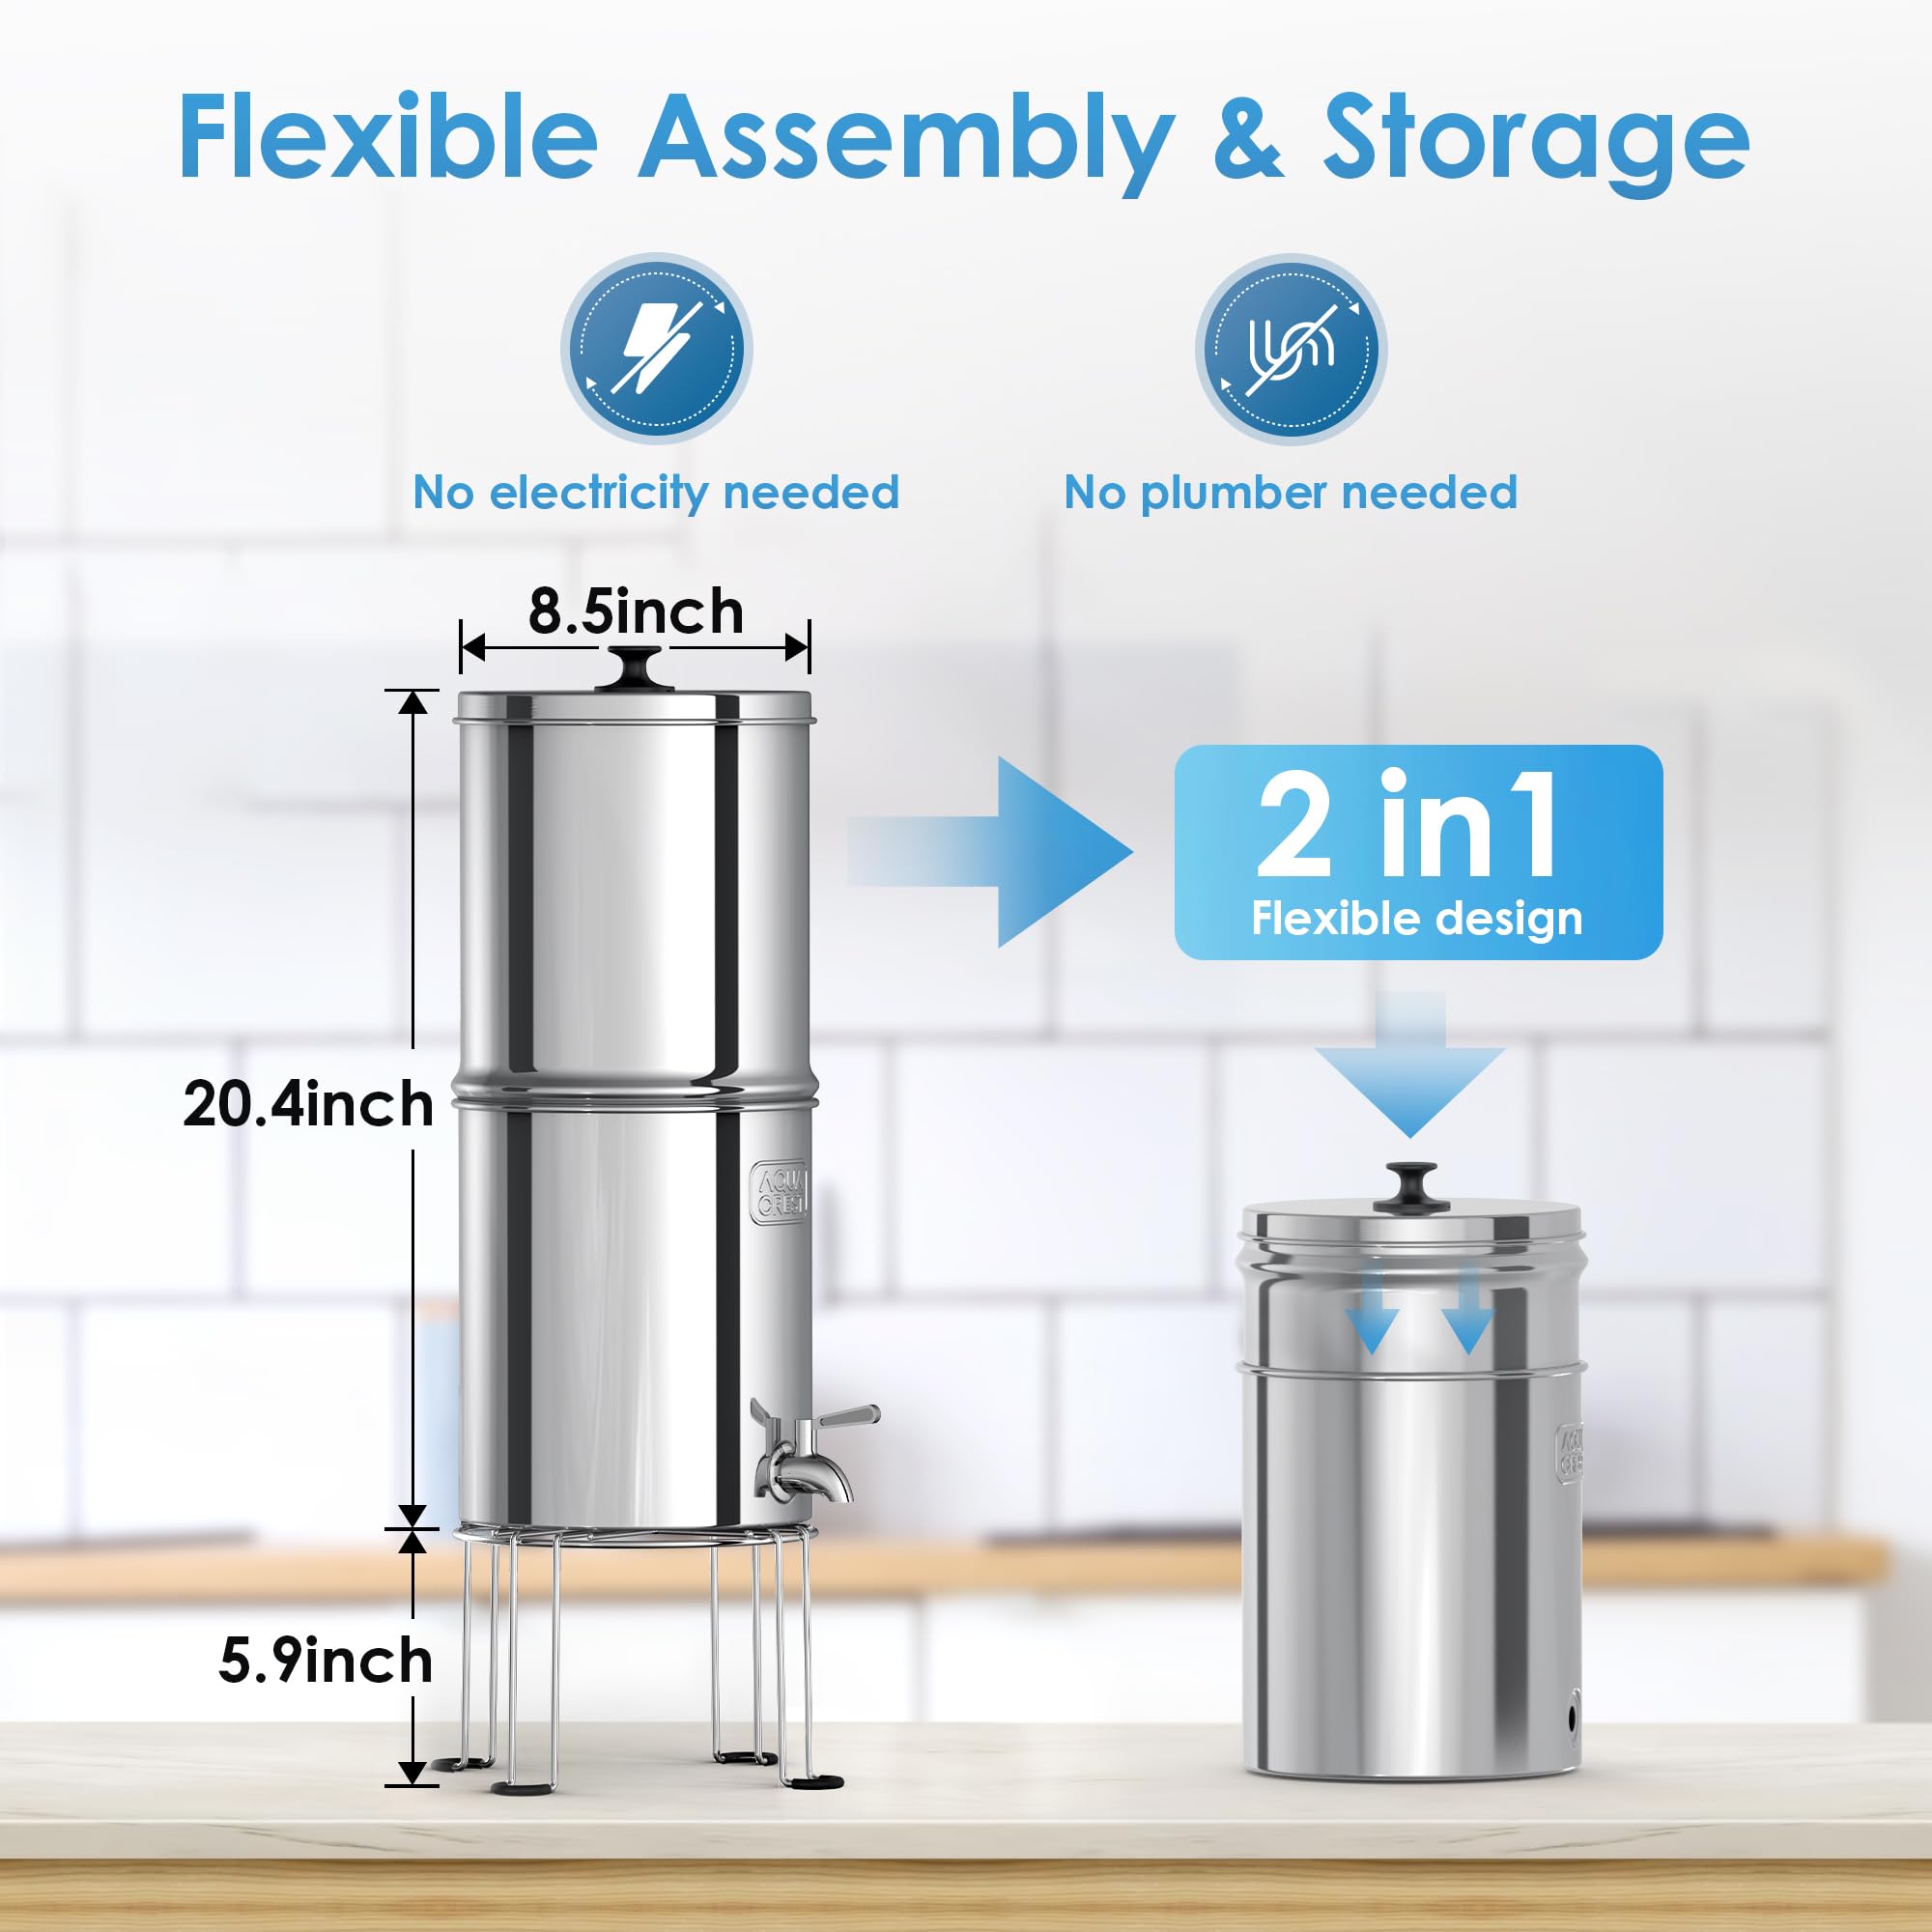 AQUA CREST Gravity Water Filter System, 304 Stainless Steel Countertop System with 4 Filters and Anti-Slip Stand, Reduce Fluoride and Chlorine, 2.25G, for Home, Camping, RVing, Off-Grid, Emergencies